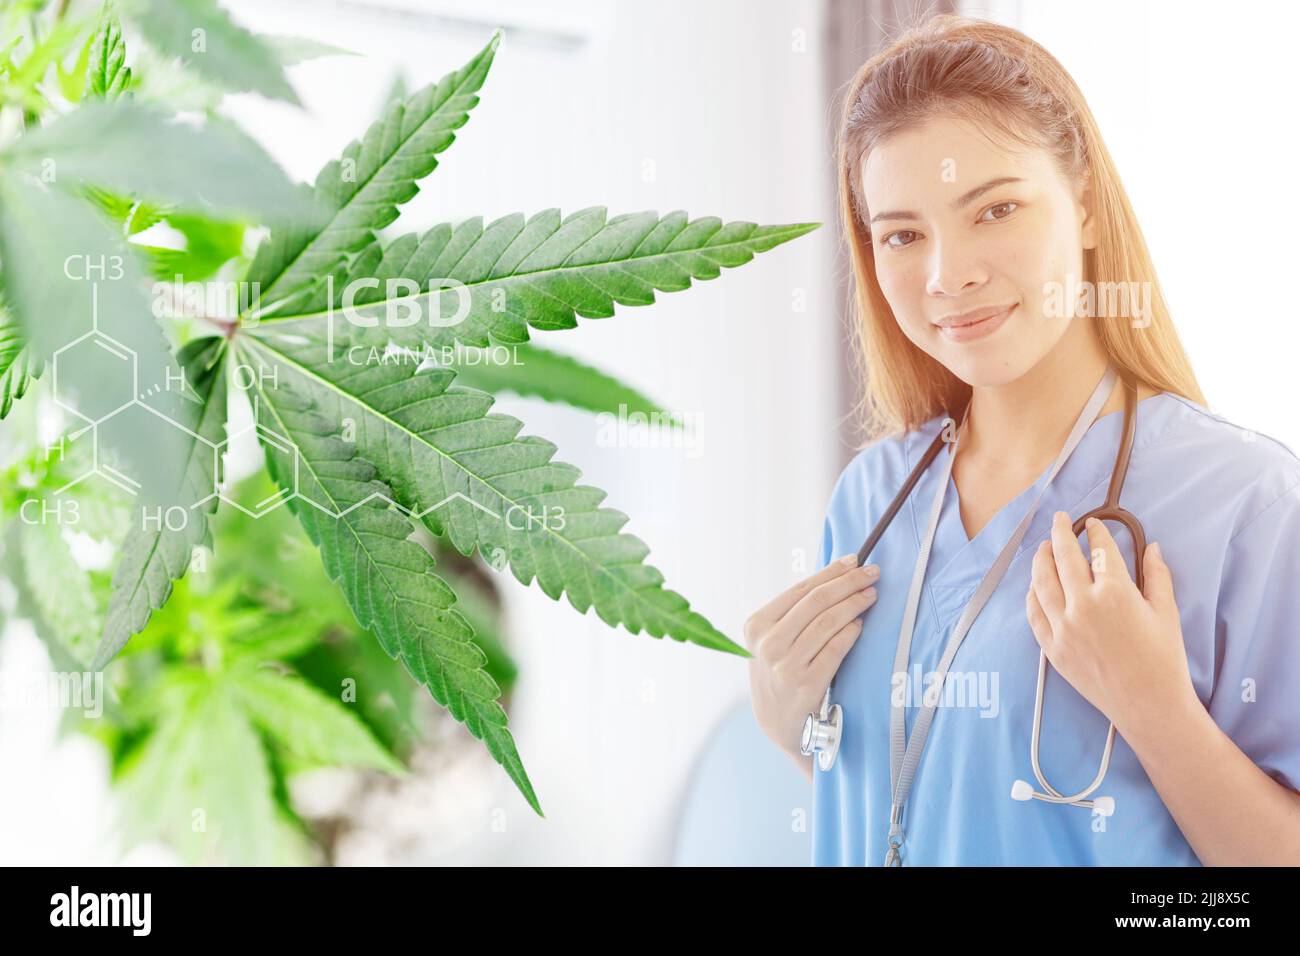 Cannabis plant hemp with happy doctor smile for using CBD in medical therapy pain relief concept. Stock Photo